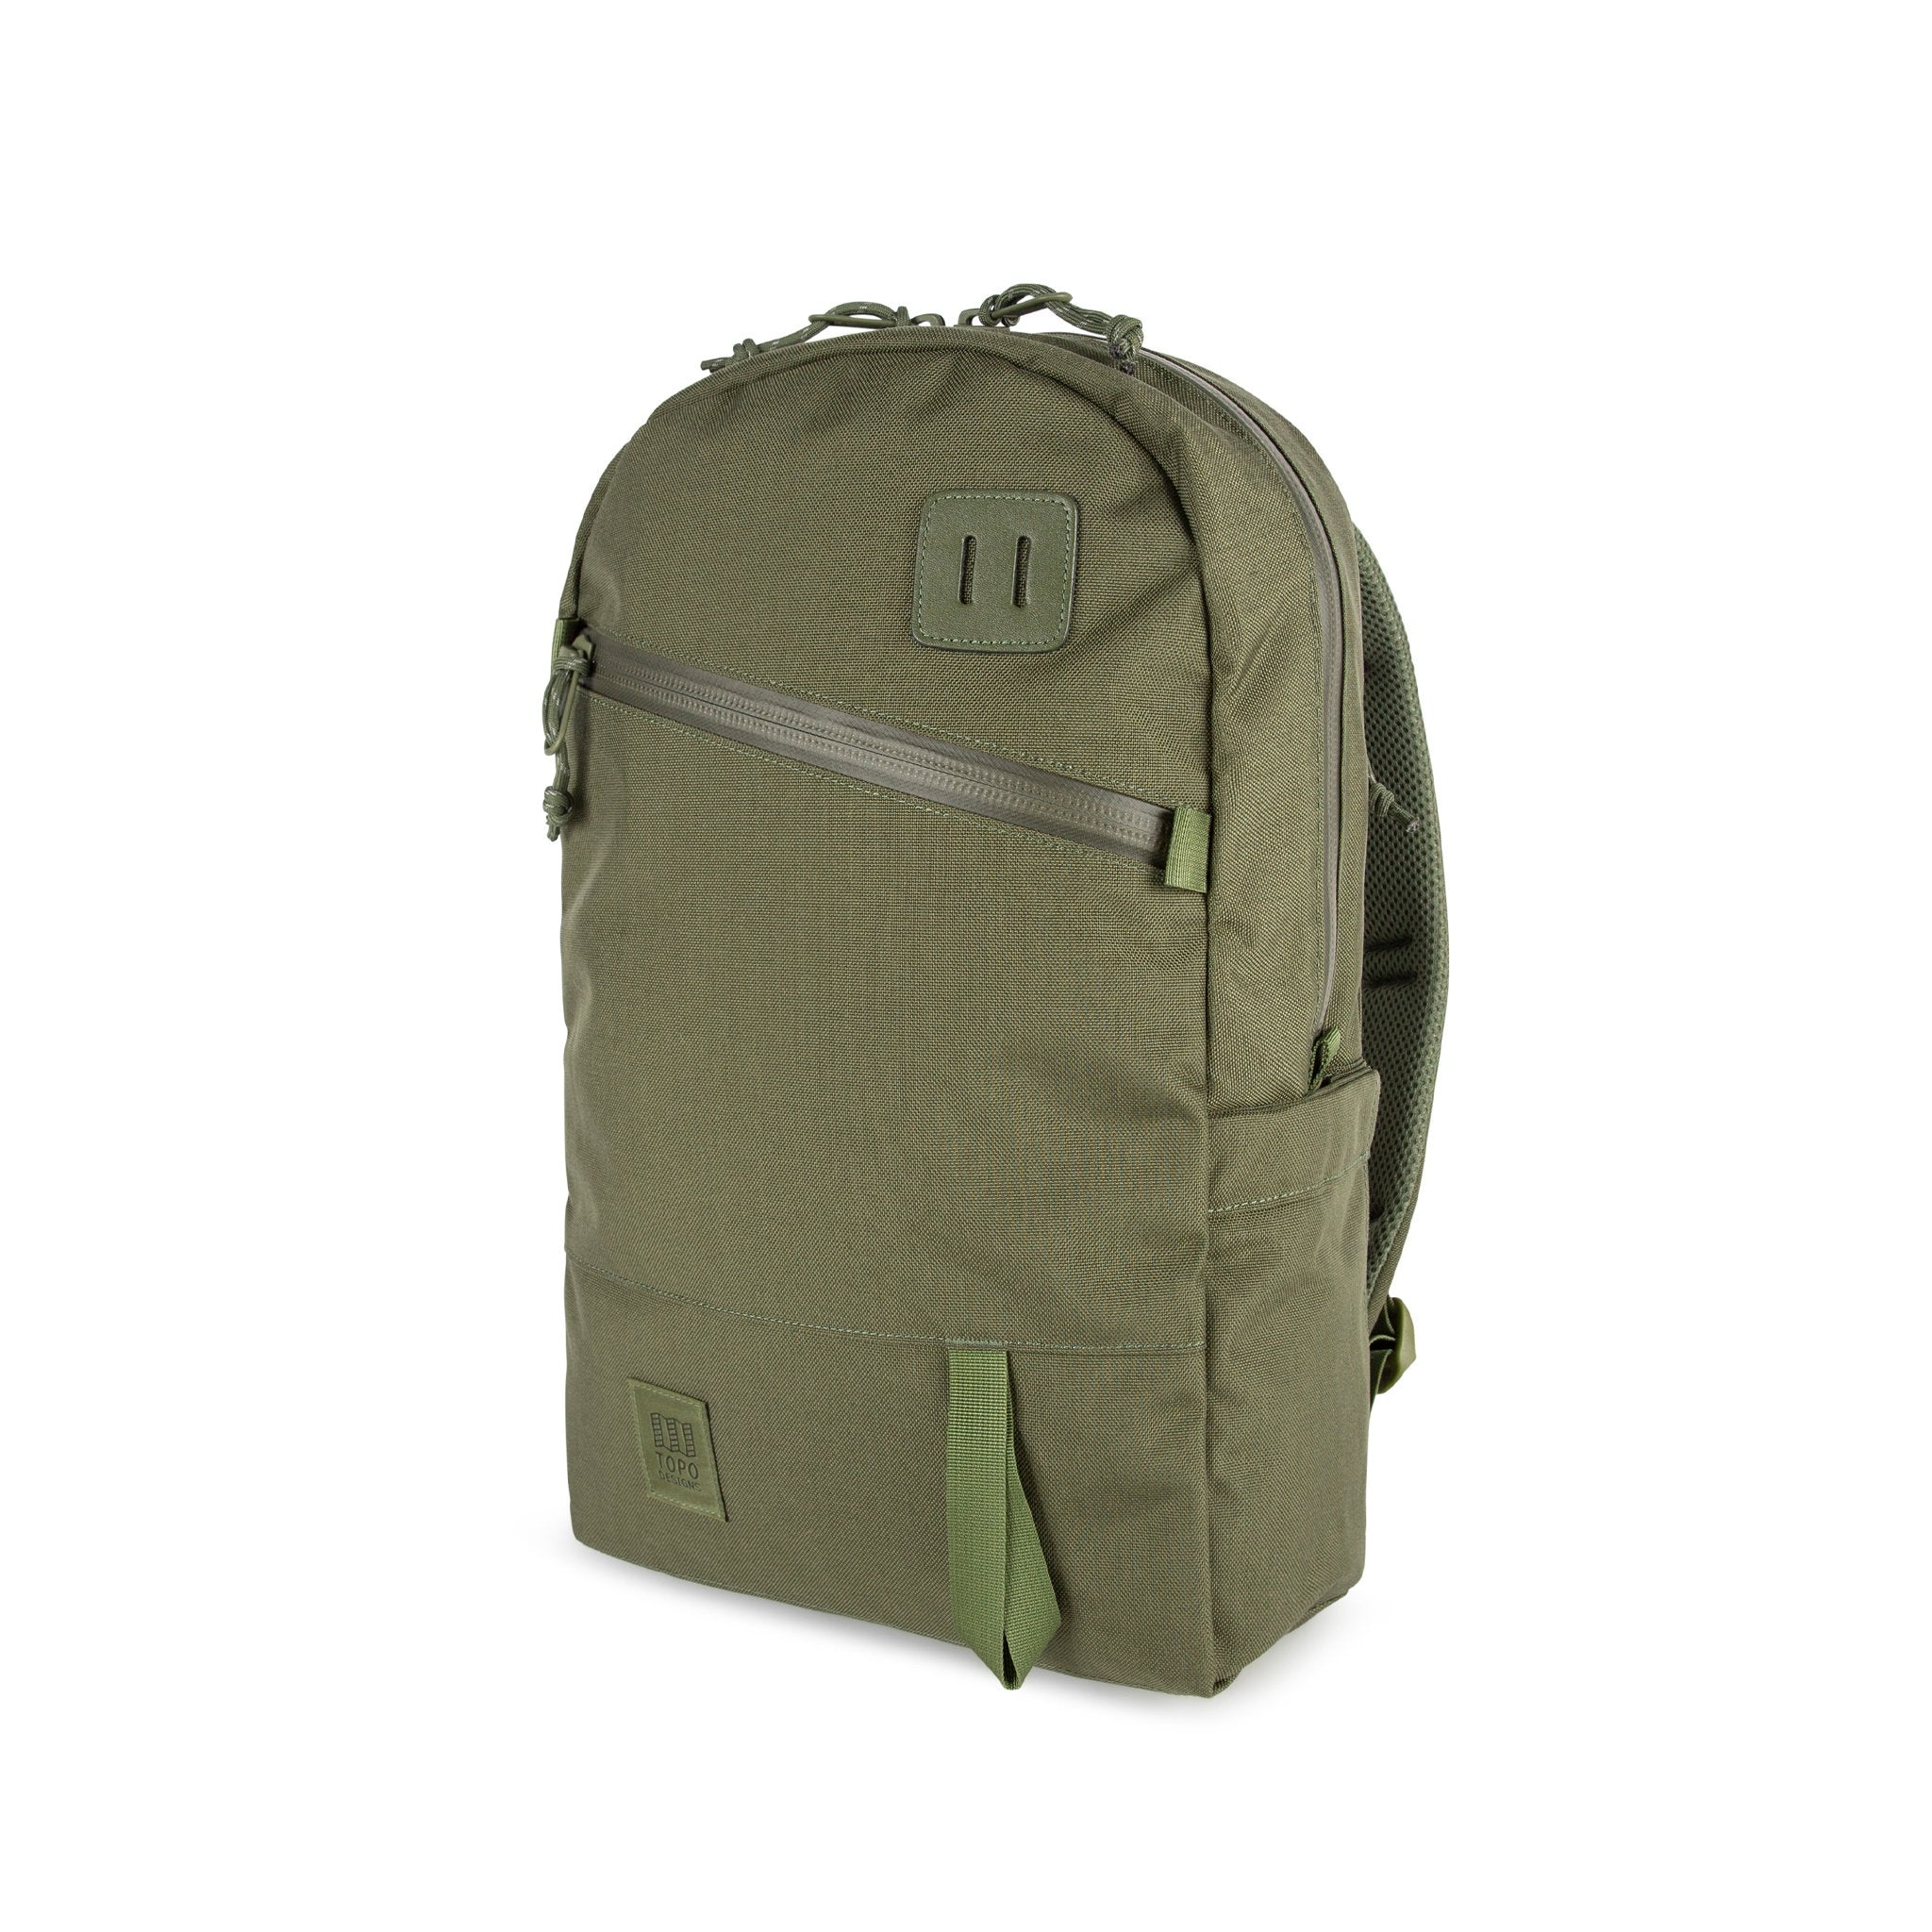 Topo Designs Daypack Tech 100% recycled nylon backpack with external laptop access in "Olive" green.